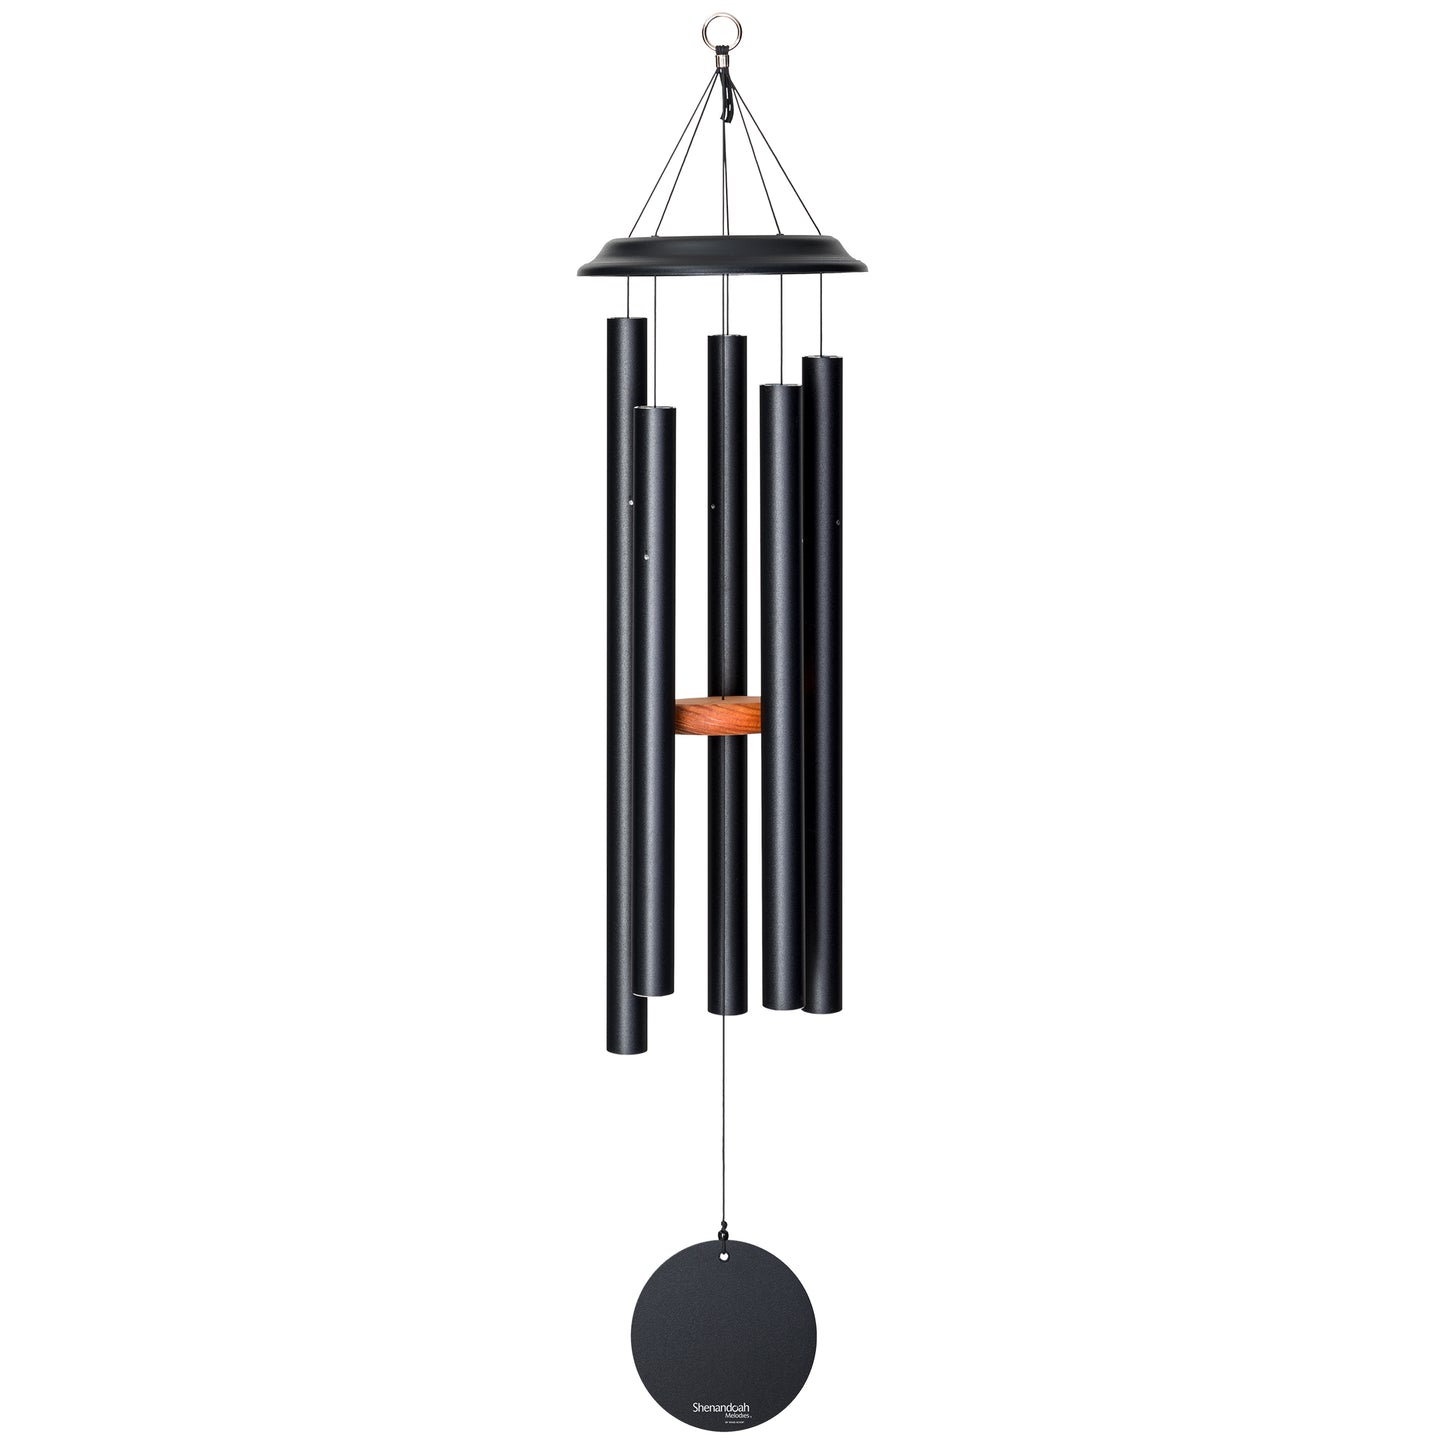  These Black Wind River Shenandoah Melodies wind chimes from Home and Garden Treasures are crafted with six hollow tubes of varying sizes suspended from a central ring, creating enchanting melodies as they dance in the breeze. Complete with a stylish round metal sail that catches gentle winds, each Shenandoah Melodies exemplifies the calming song of the Virginia countryside. Elevate your garden retreat with the perfect gift today!